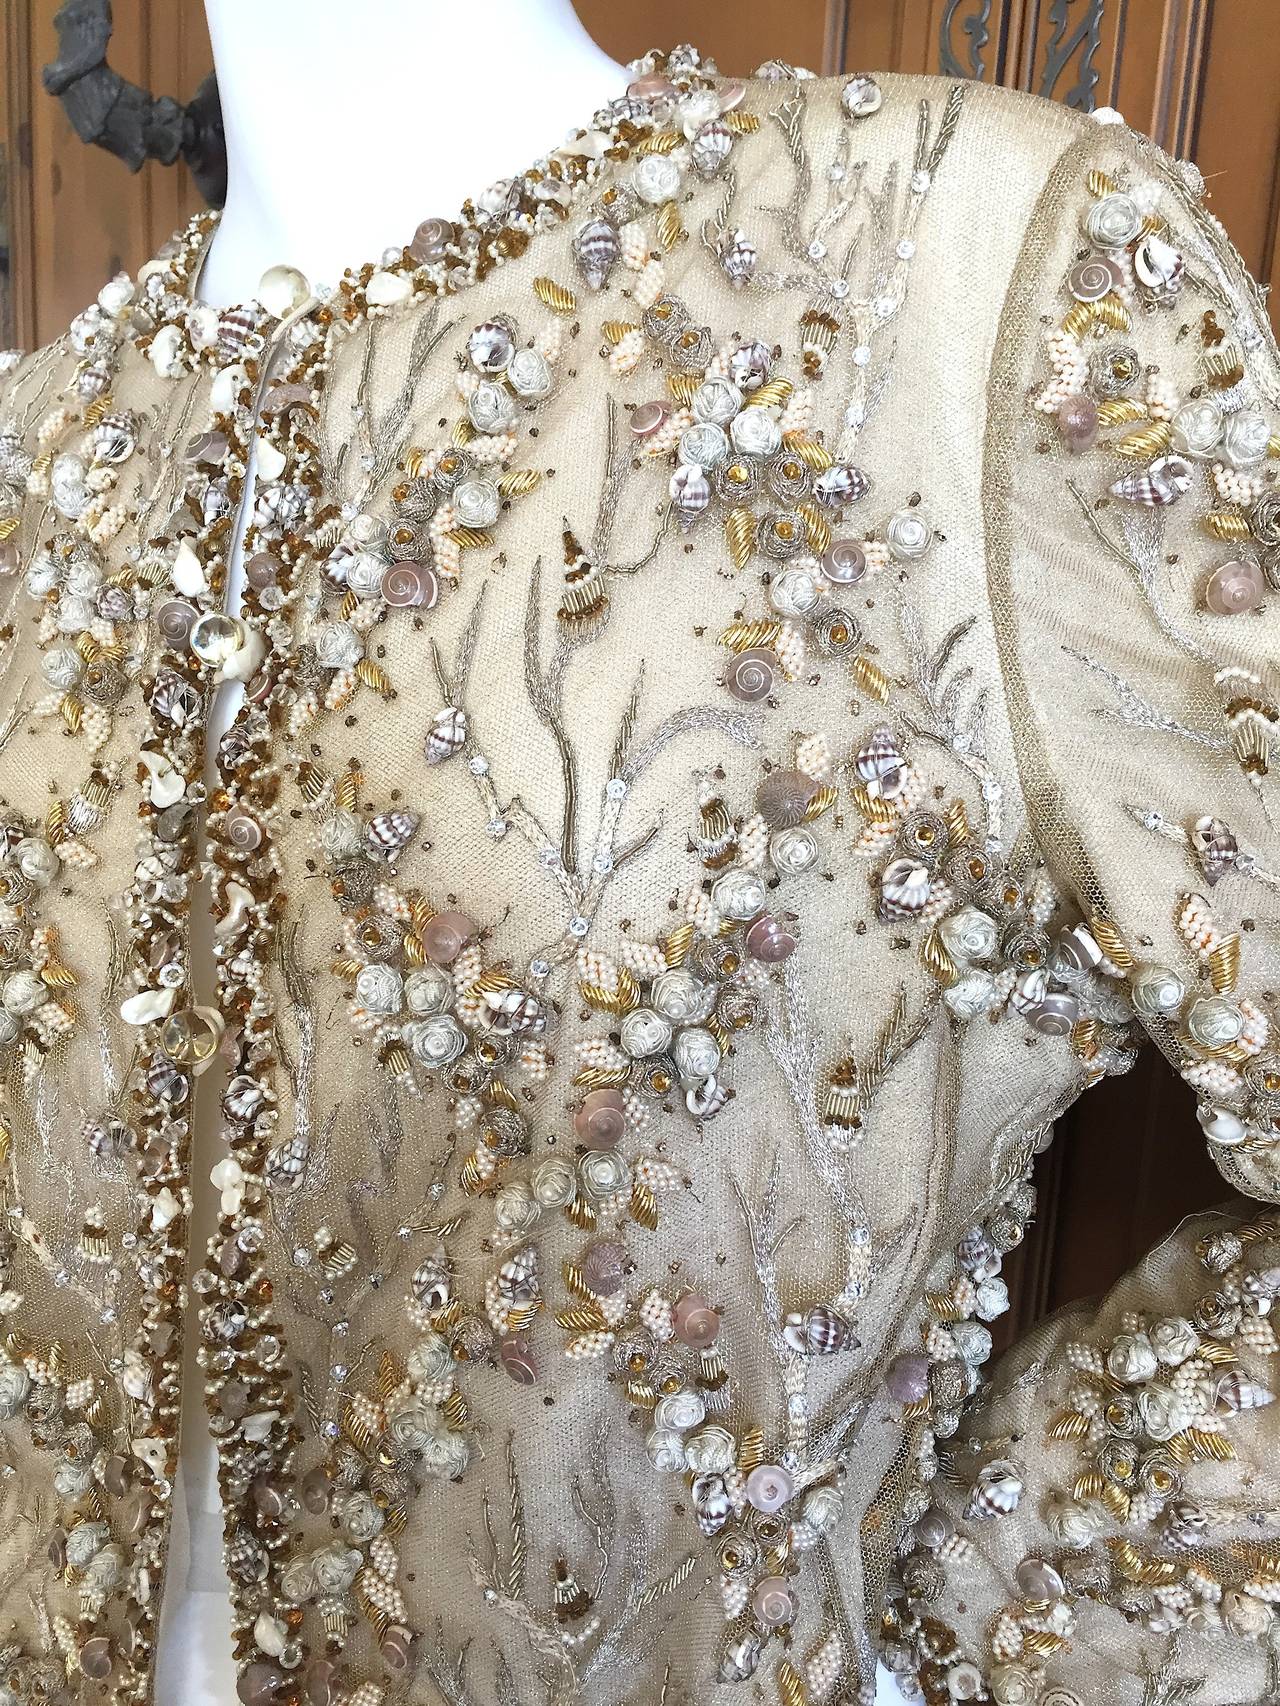 Bill Blass Heavily Embellished Shell, Bead and Pearl Trim Vintage Jacket .
This is a work of art. The hand work that went in to making this is astonishing.
Please use the zoom feature to appreciate this piece, it is really special.
Size